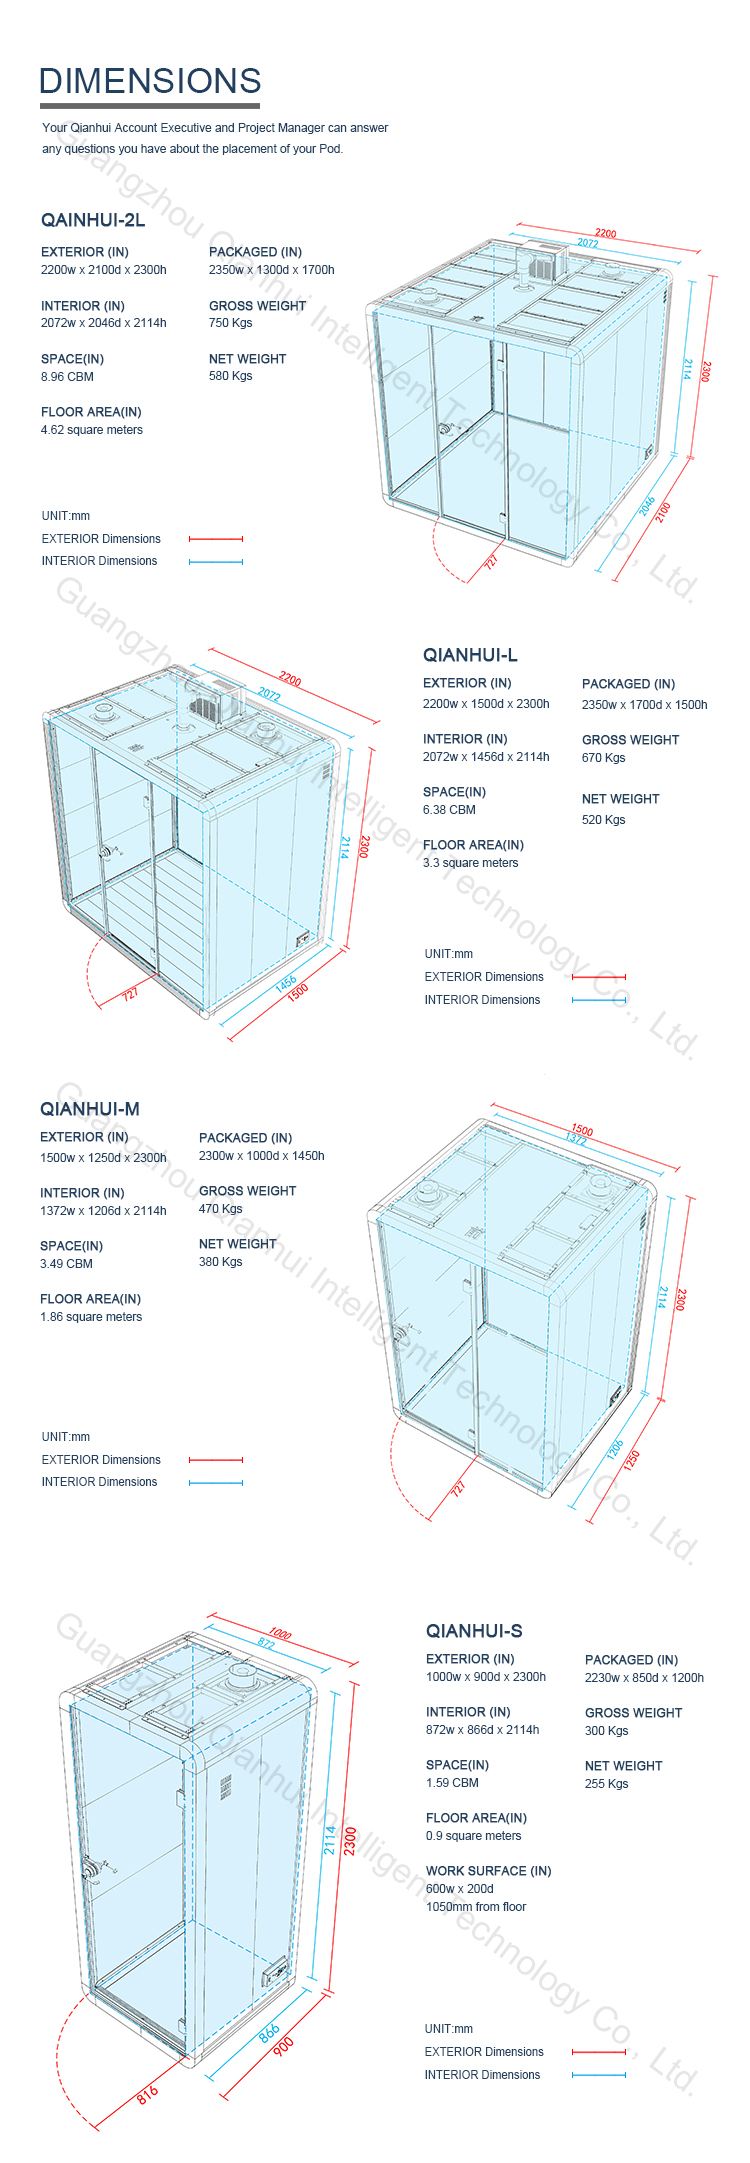 Contemporary cube place silence office mini soundproof booth for  two person studying with air flowing